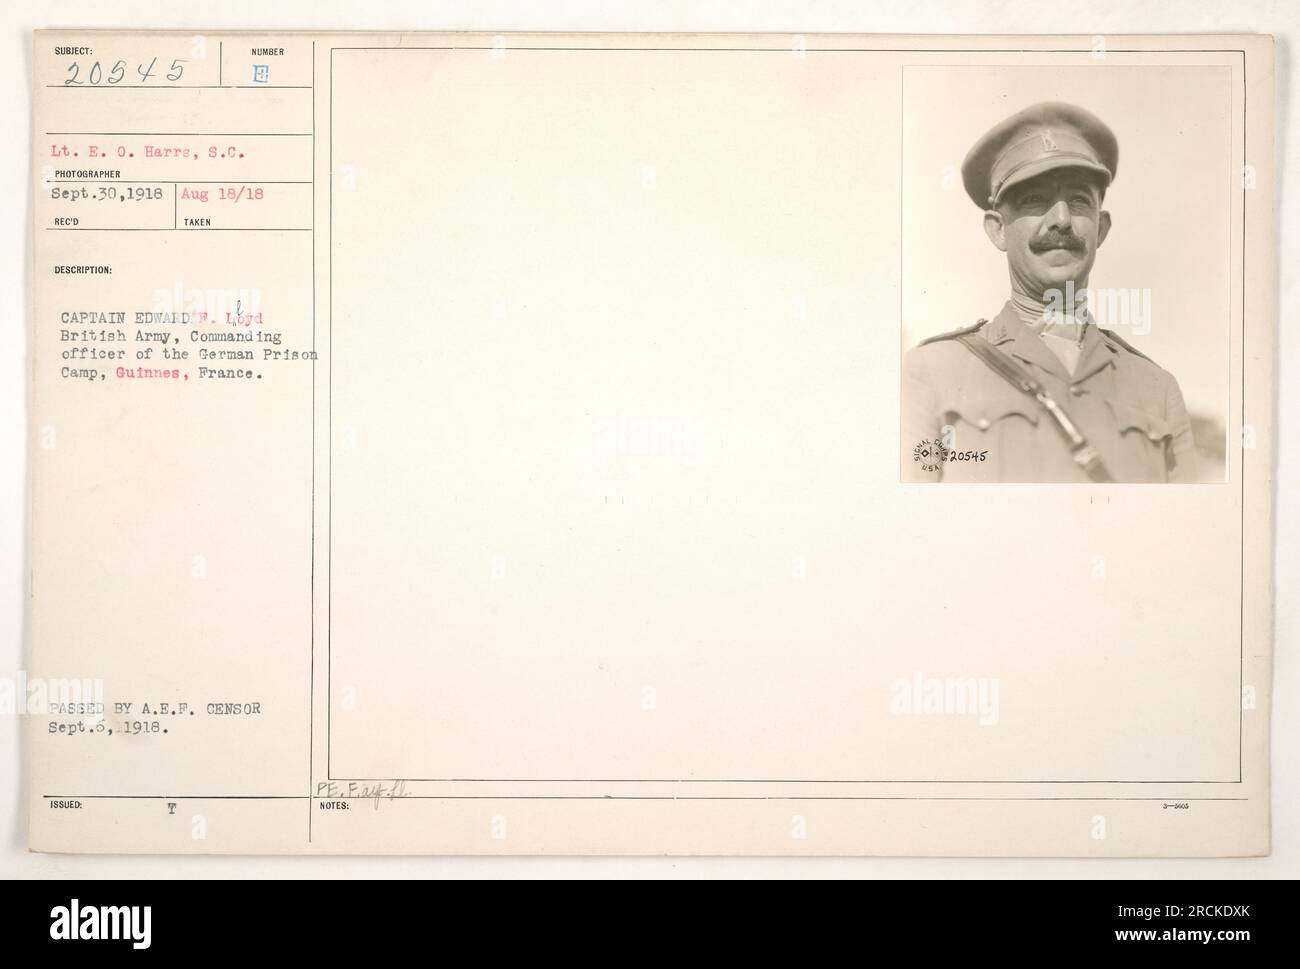 This image, captured by Lt. E. O. Harrs on September 30, 1918, depicts Captain Edward P. Loyd of the British Army. He is seen in his role as the commanding officer of the German Prison Camp located in Guinnes, France. The photograph was approved by the A.E.P. censor on September 6, 1918. Stock Photo